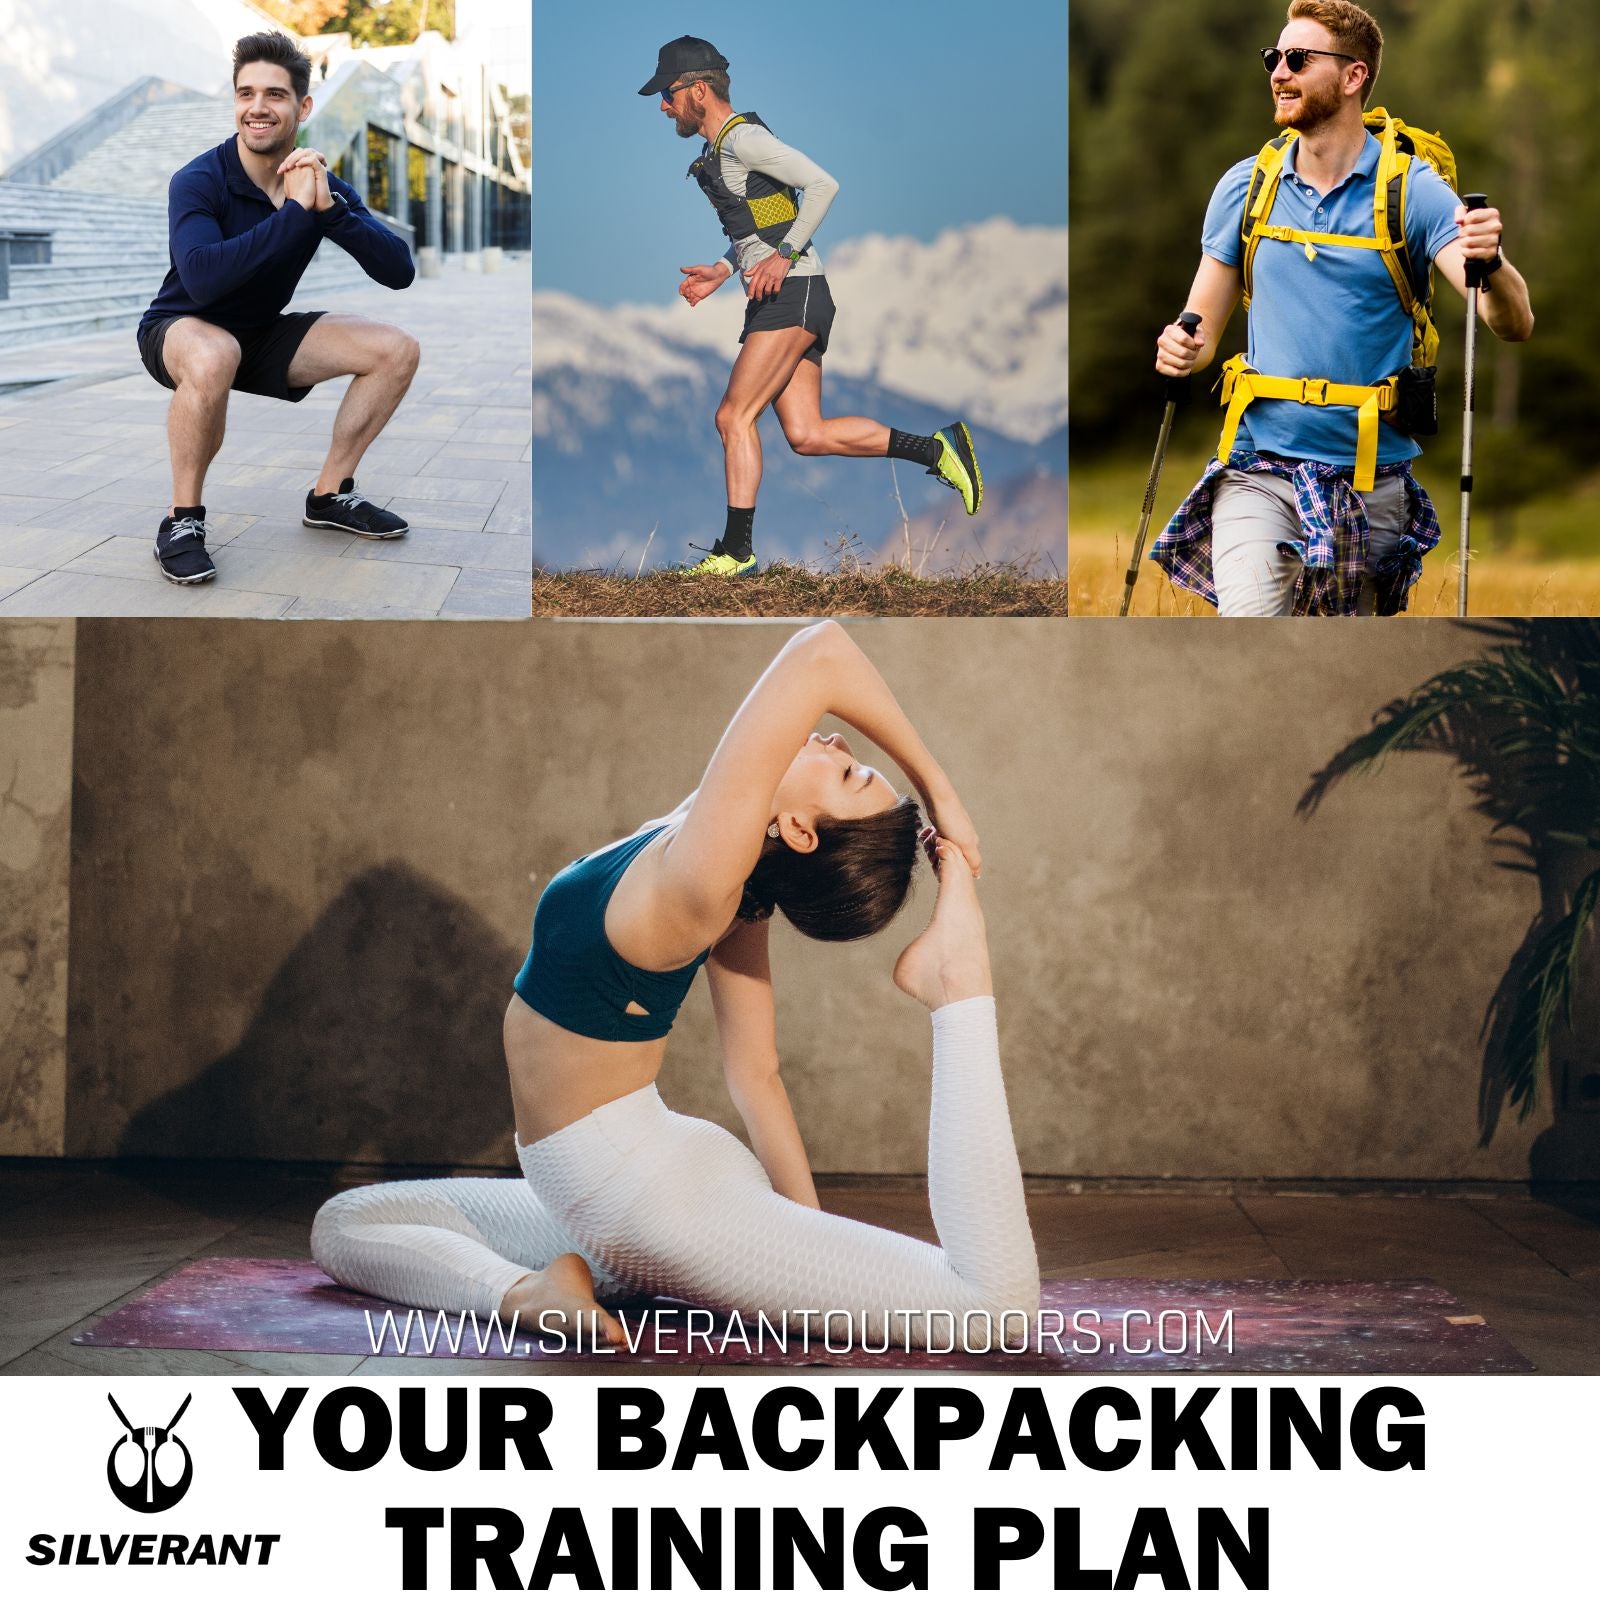 Your Backpacking Training Plan